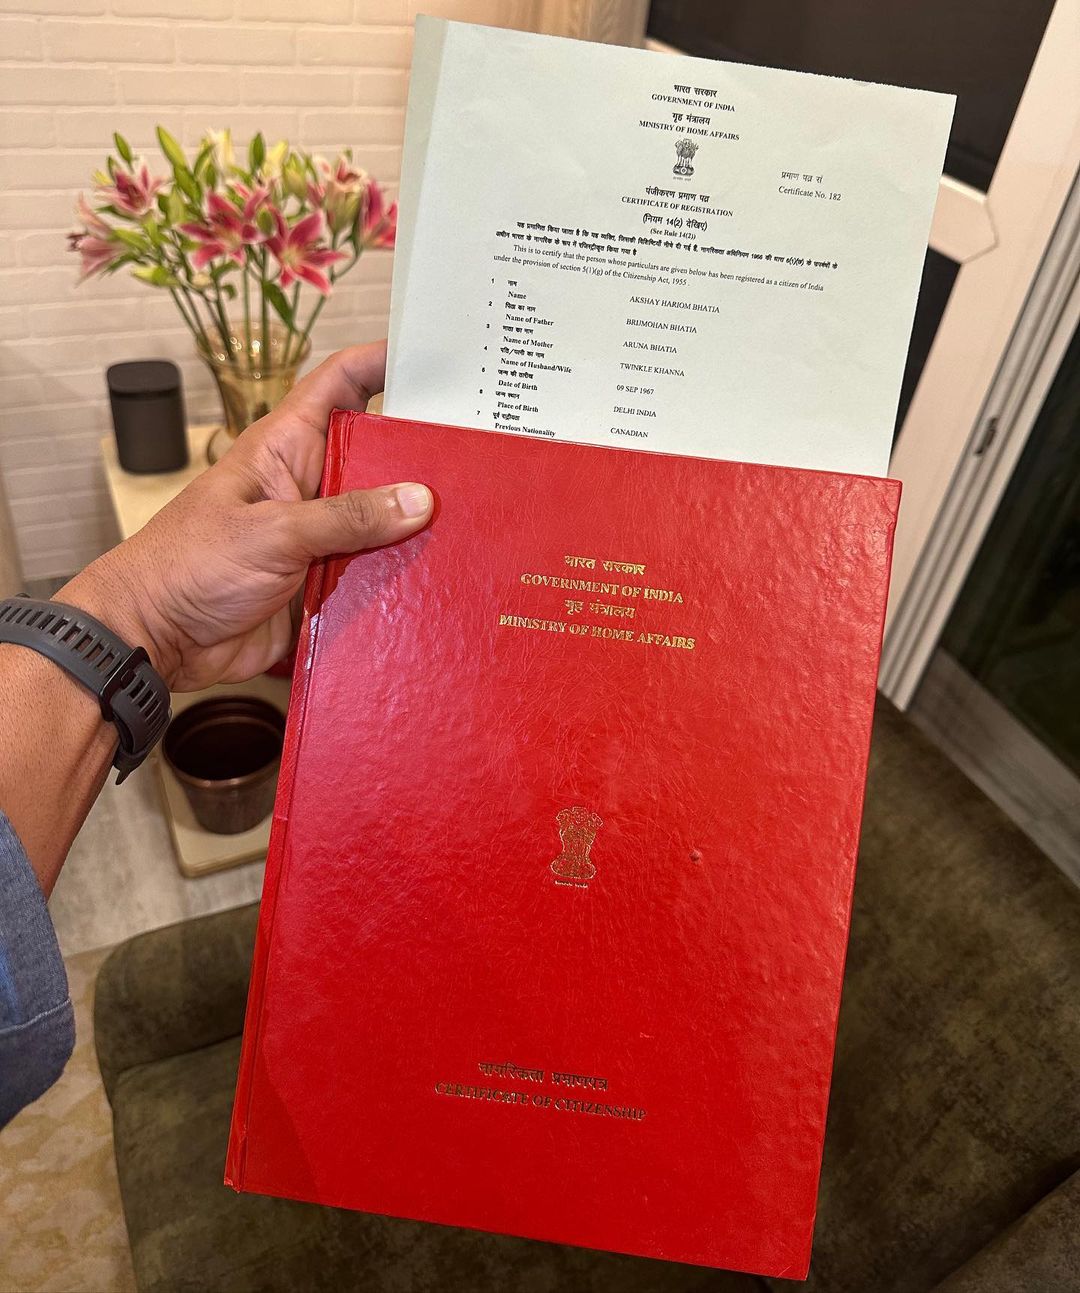 Akshay Kumar is now a citizen of India